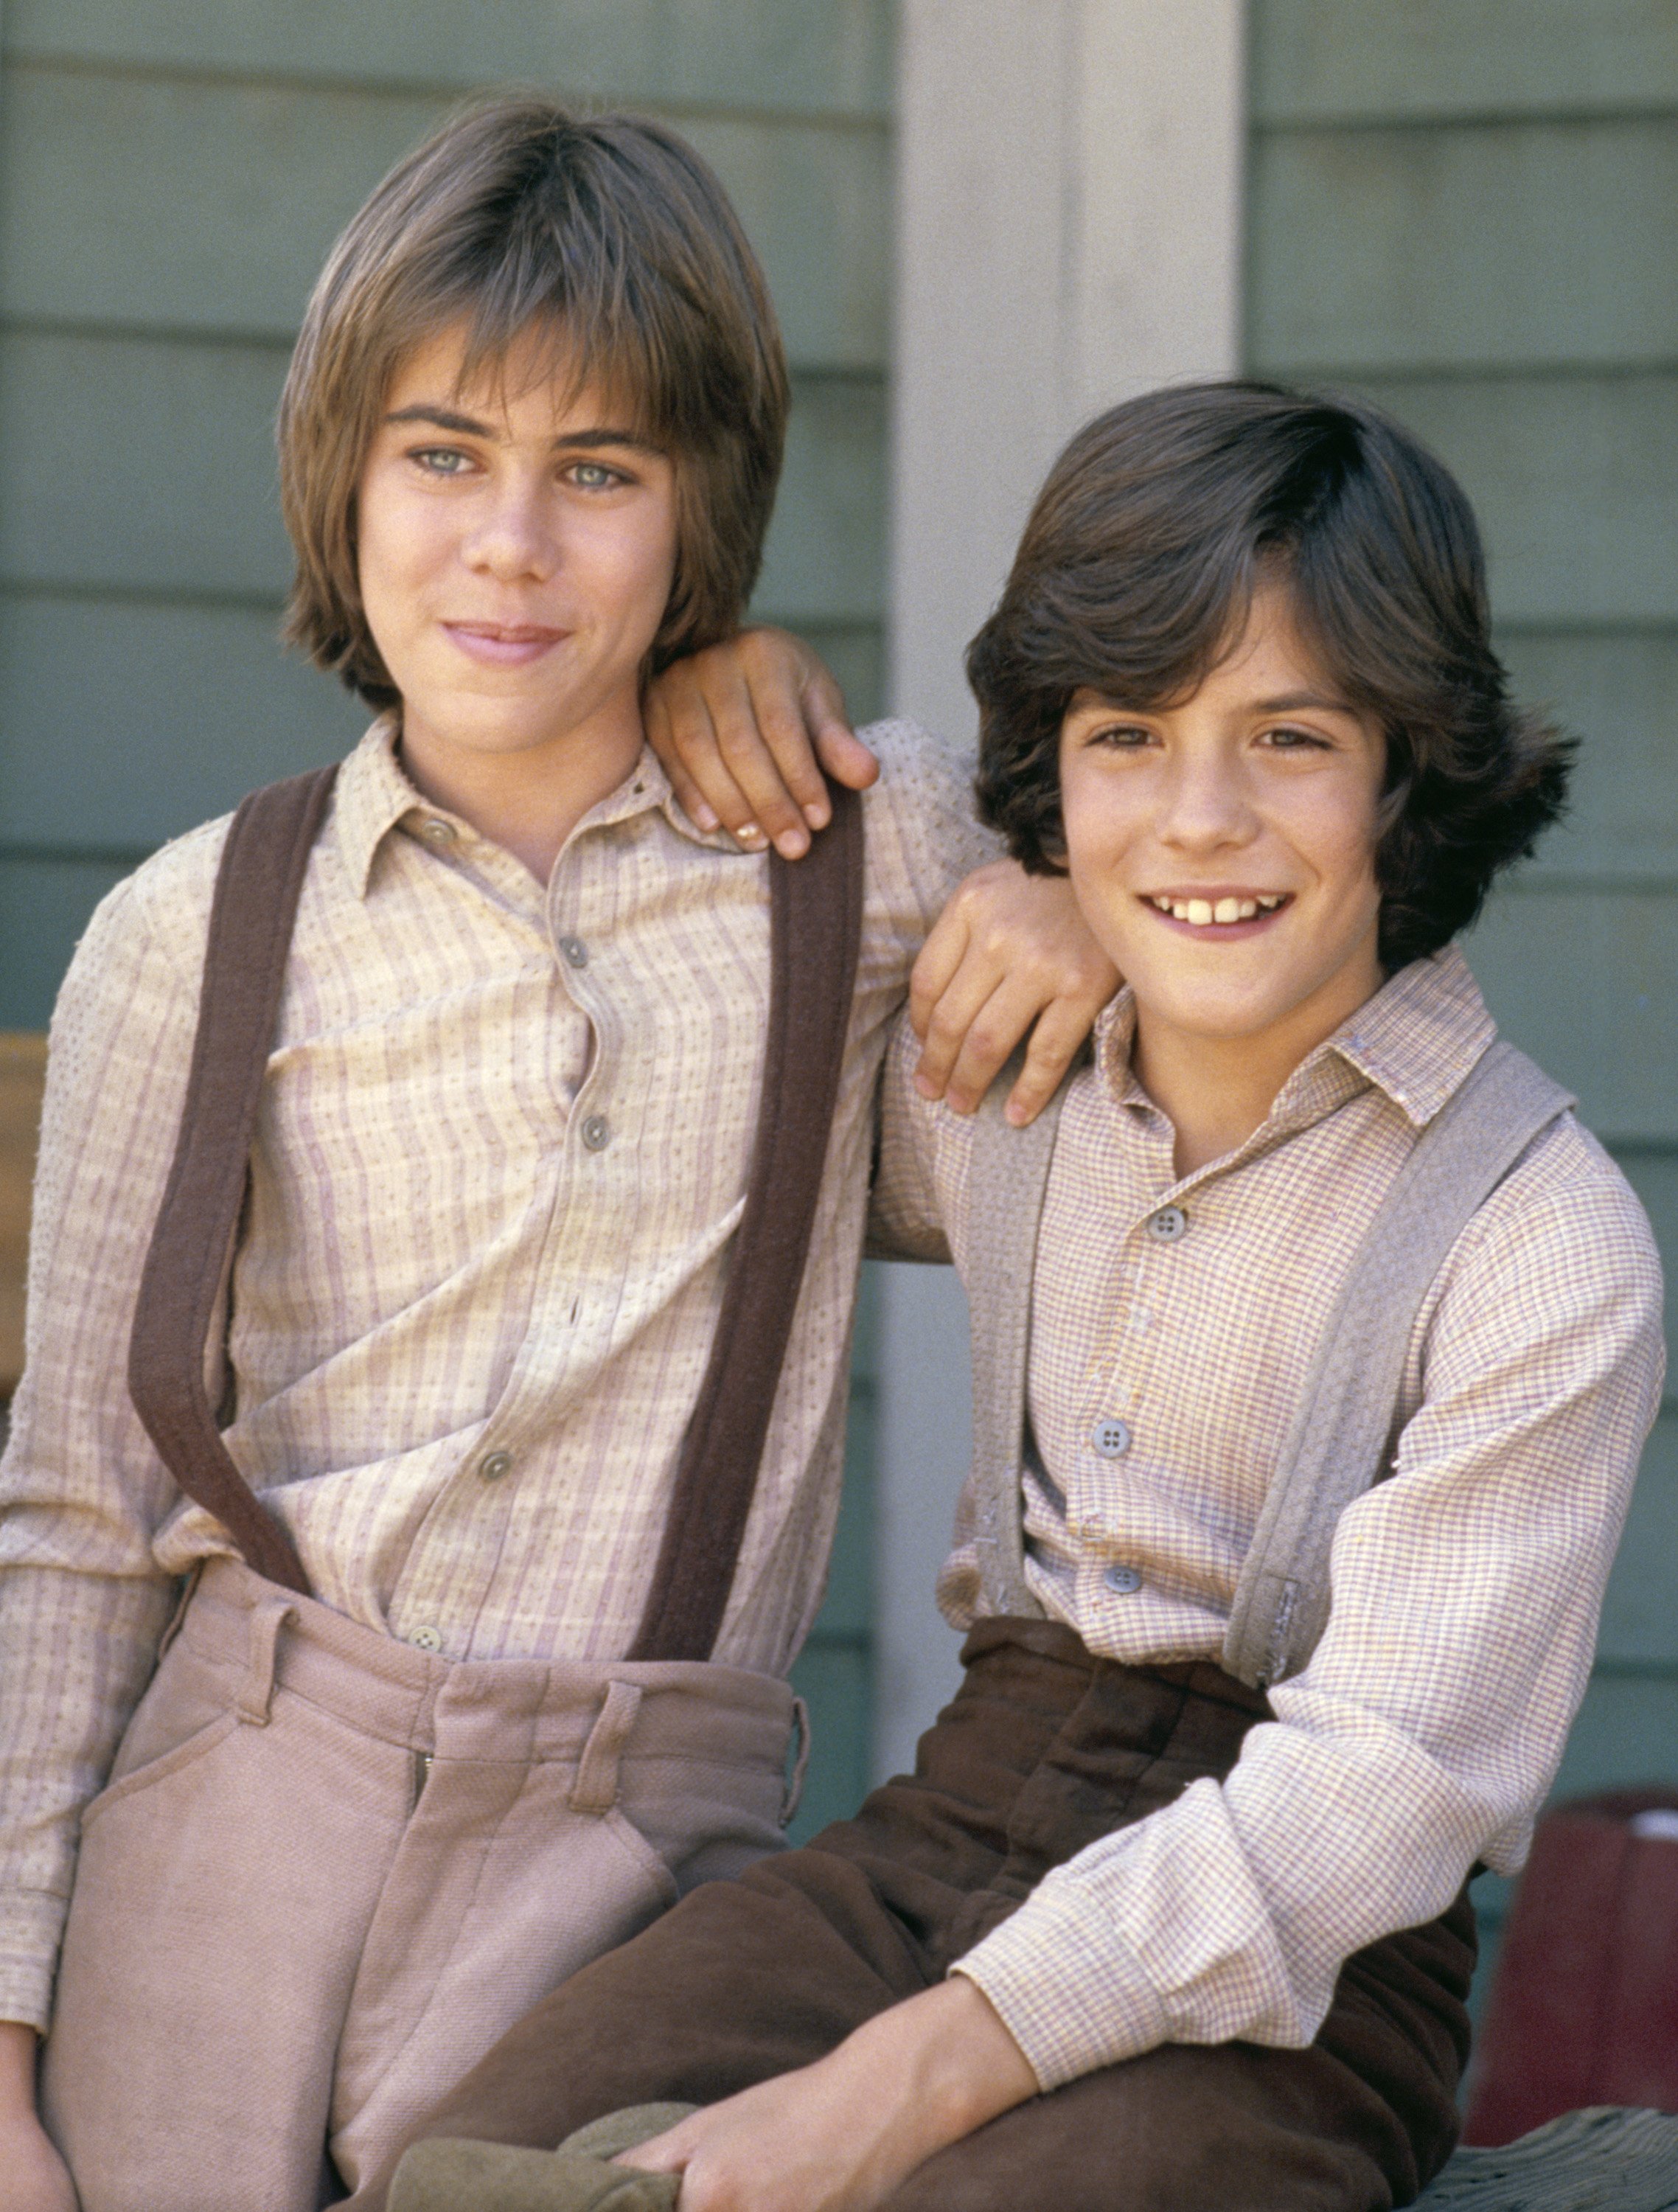 Patrick Labyorteaux as Andrew Garvey and Matthew Labyorteaux as Albert Quinn Ingalls on season 5 of "Little House on the Prairie" in an undated picture | Source: Getty Images